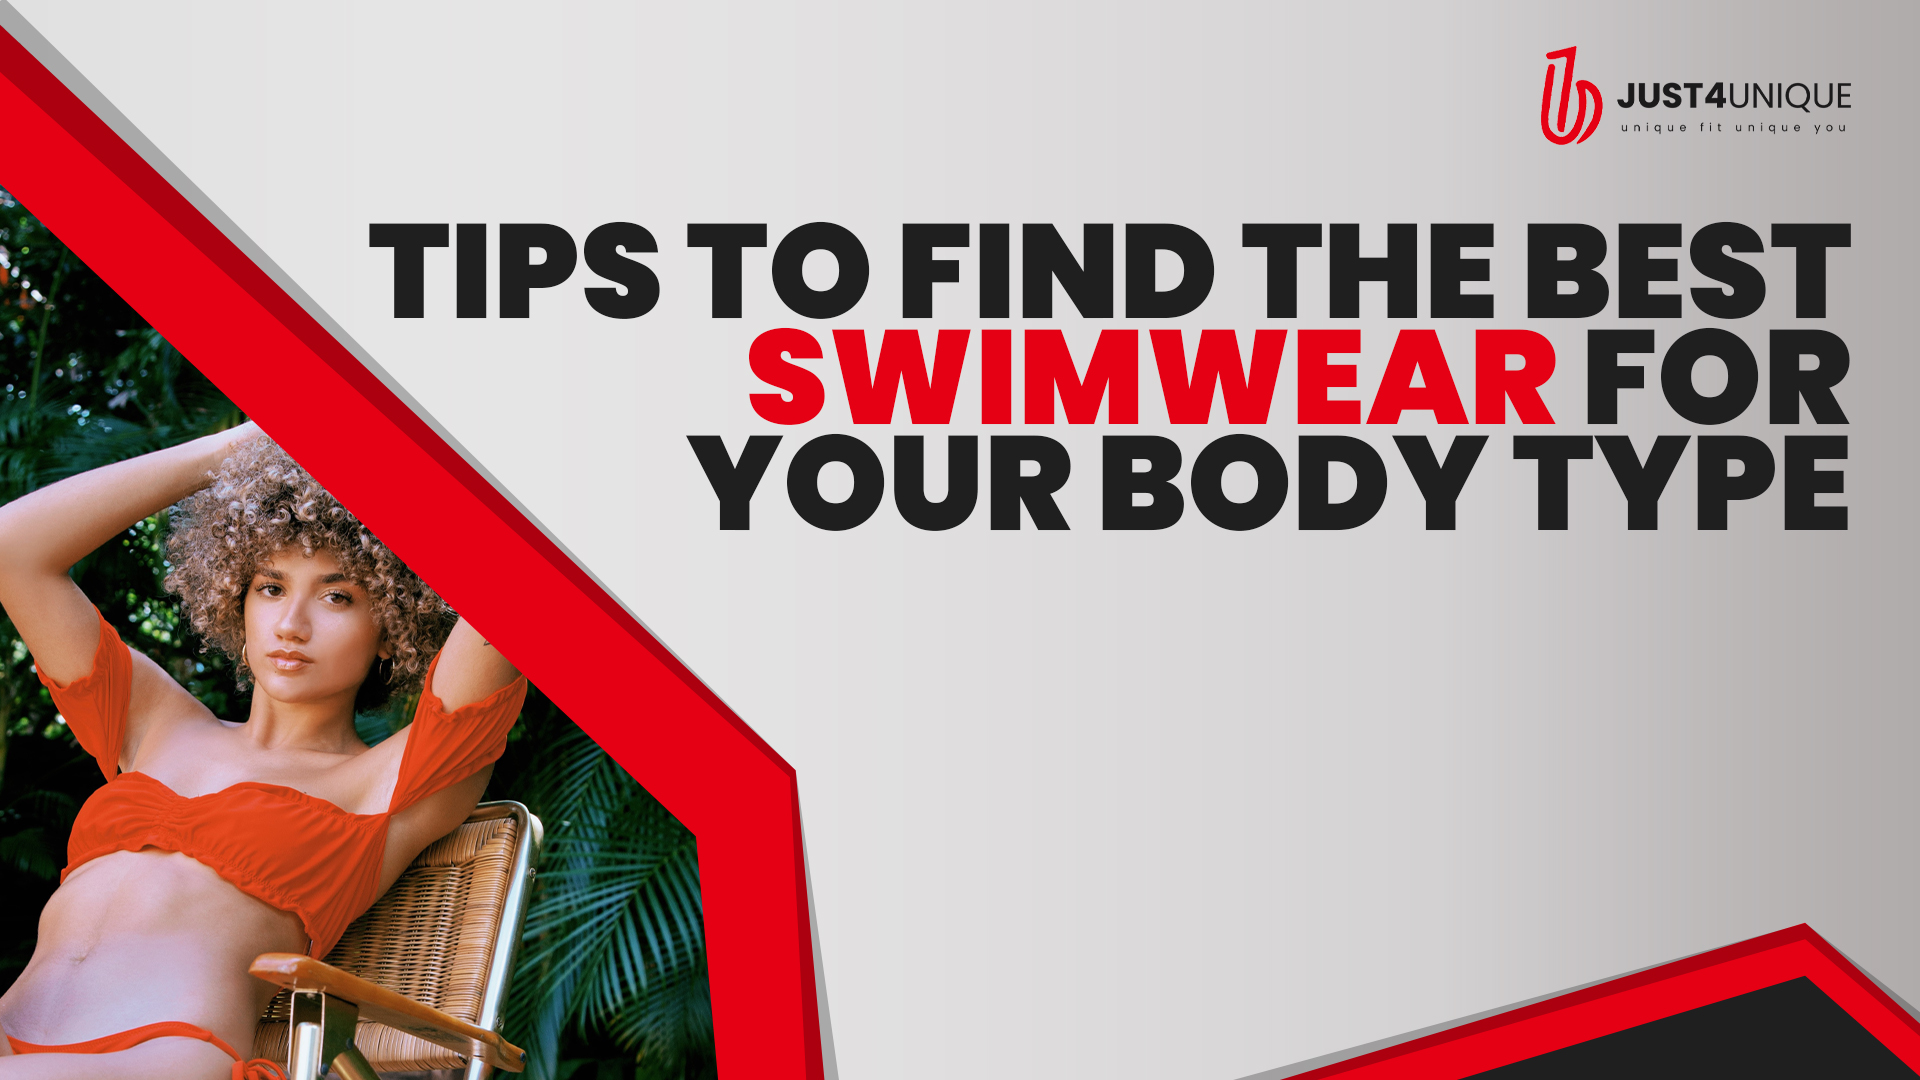 Guideline to Find the Best Swimsuit for Your Body Type